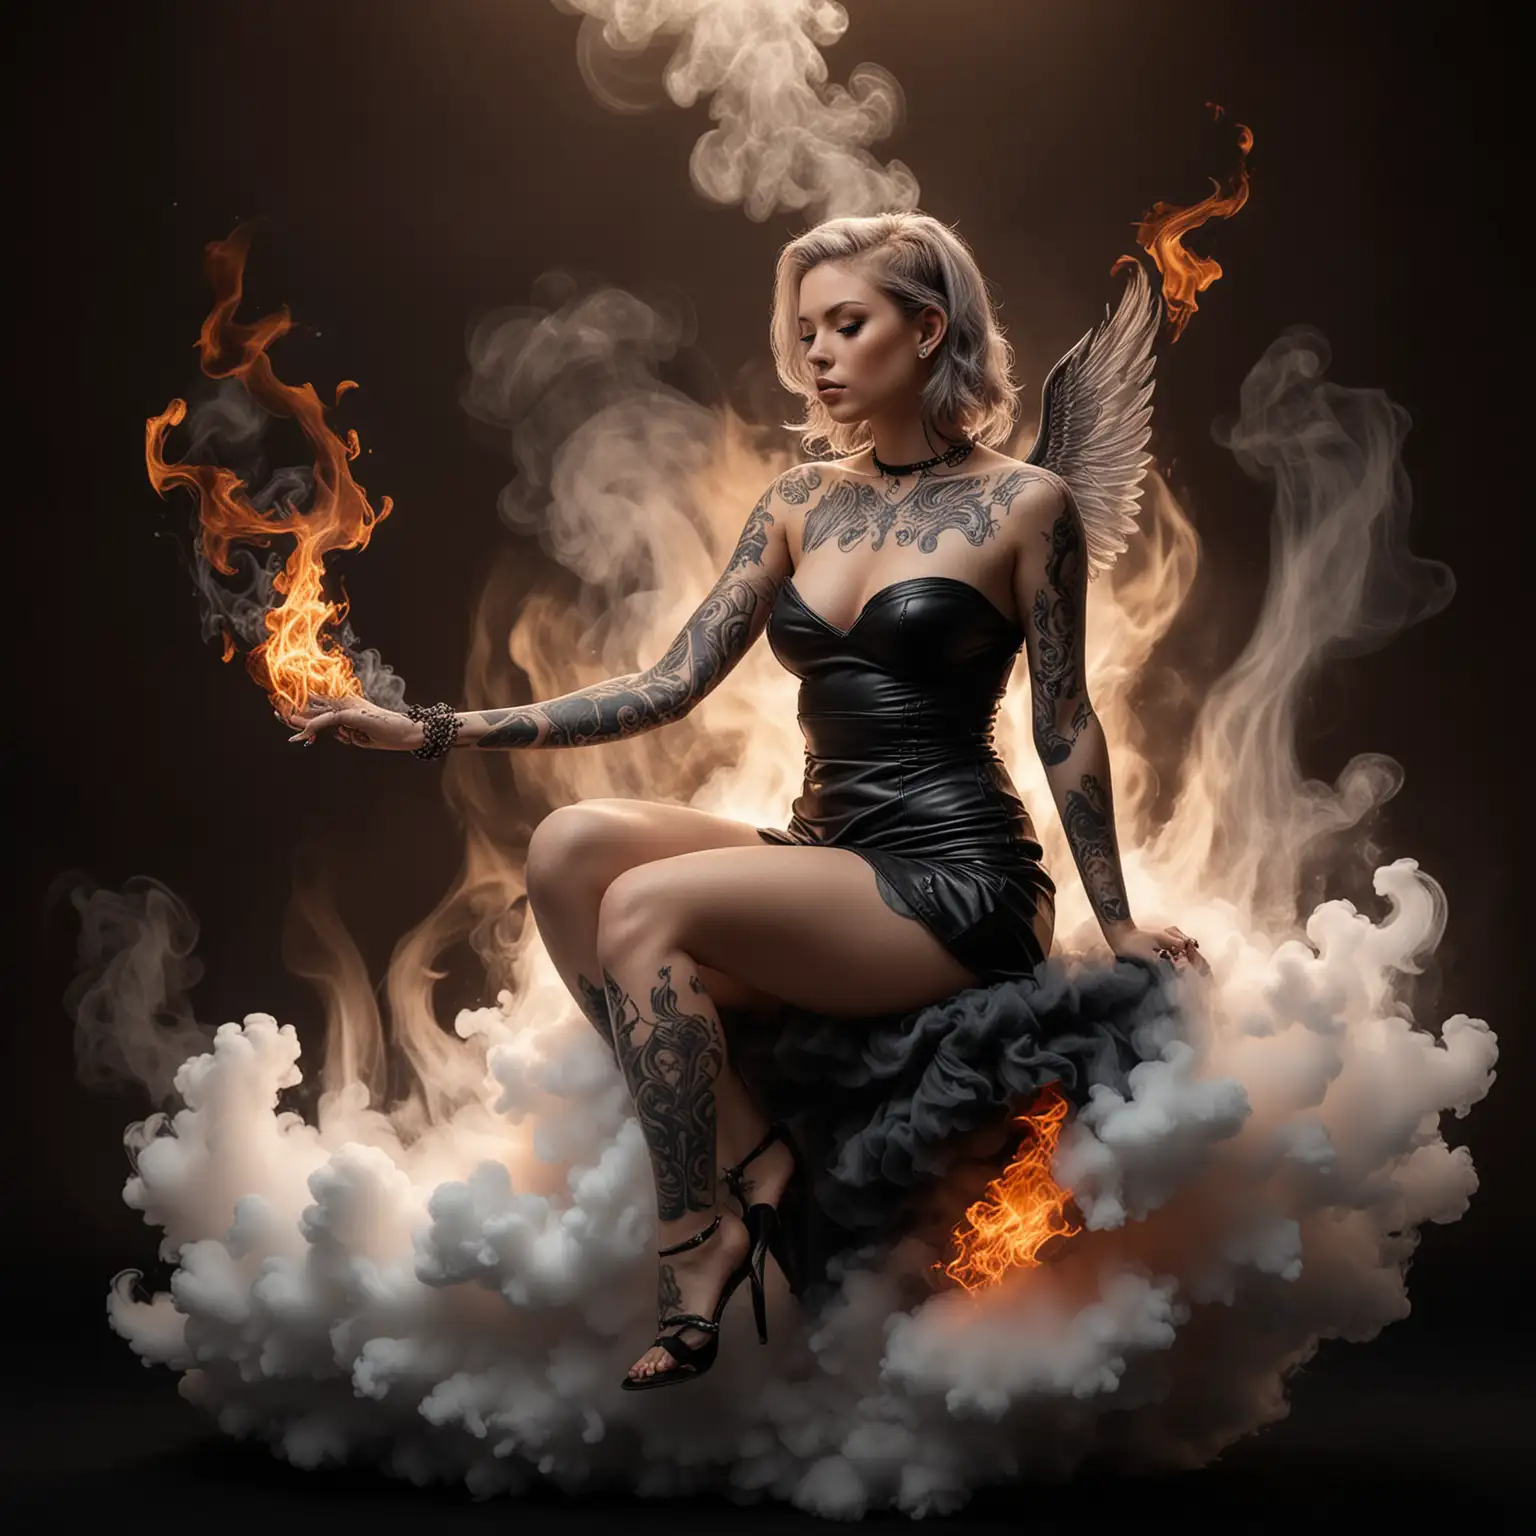 hyper realistic photography
a beautiful tattooed angel, She is wearing a black mini dress, seated on cloud of smoke and flames While her body posture shows atmosphere hotness and performing tattoo on herself 